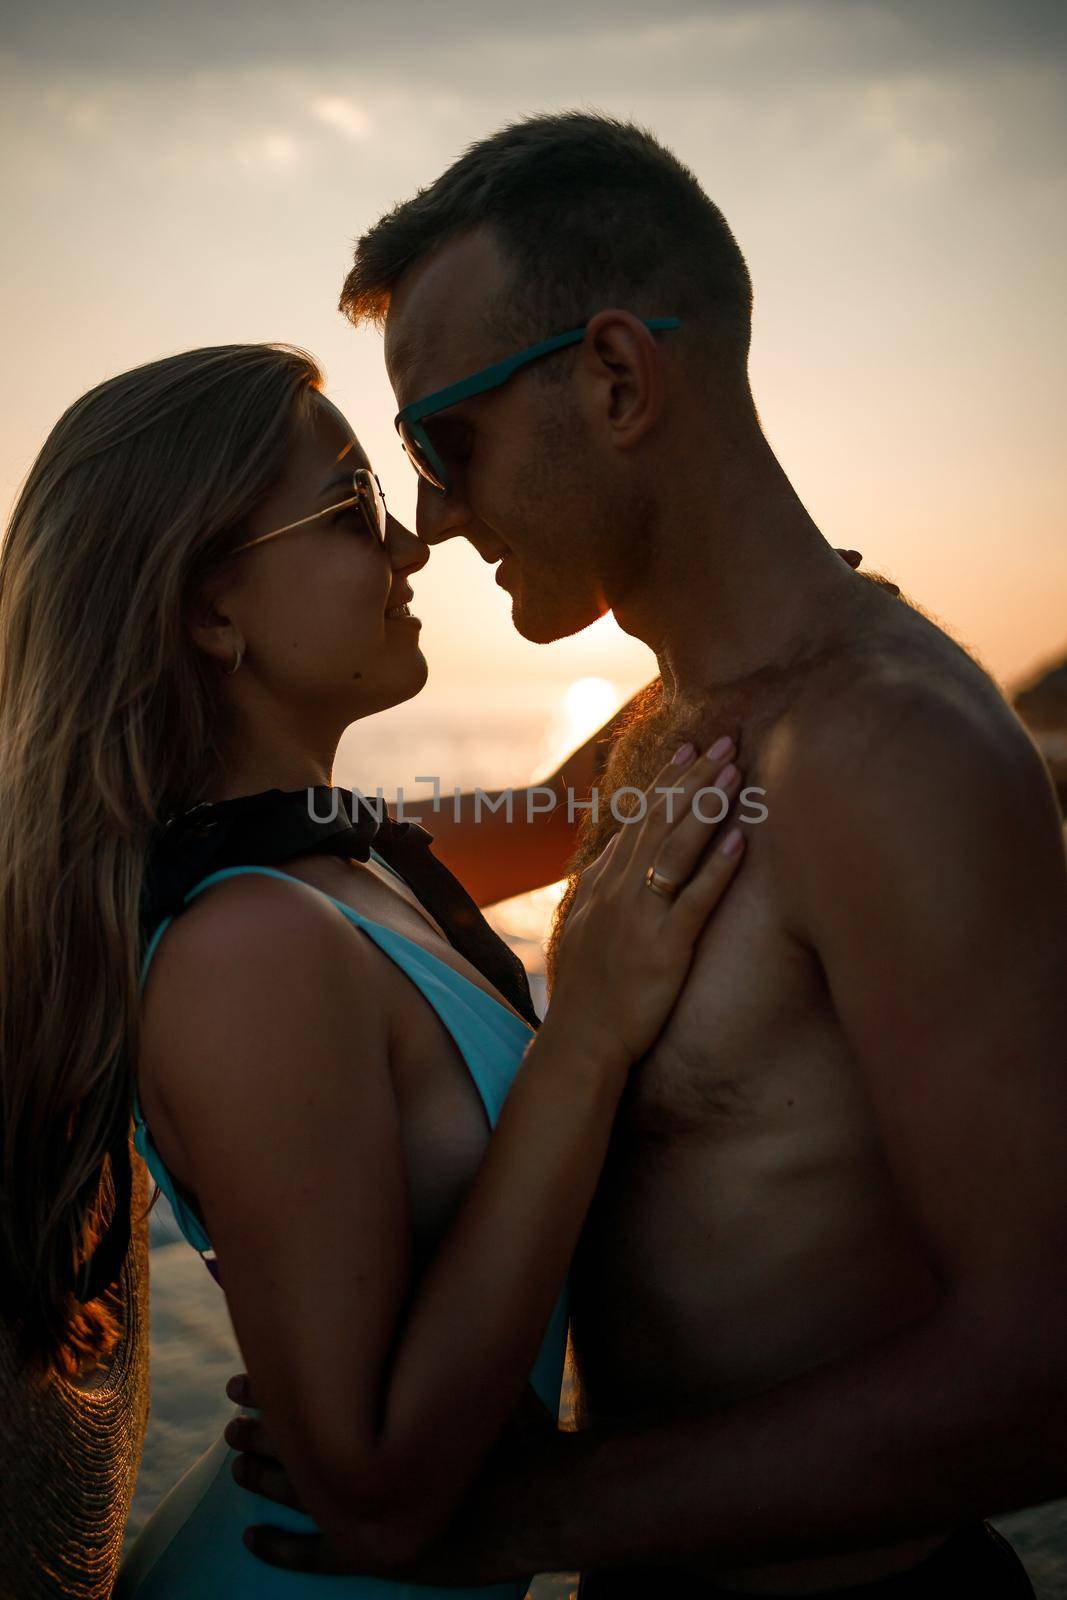 Beautiful couple in love on the background of the sunset by the sea. Young woman and man hugging by the sea at sunset by Dmitrytph